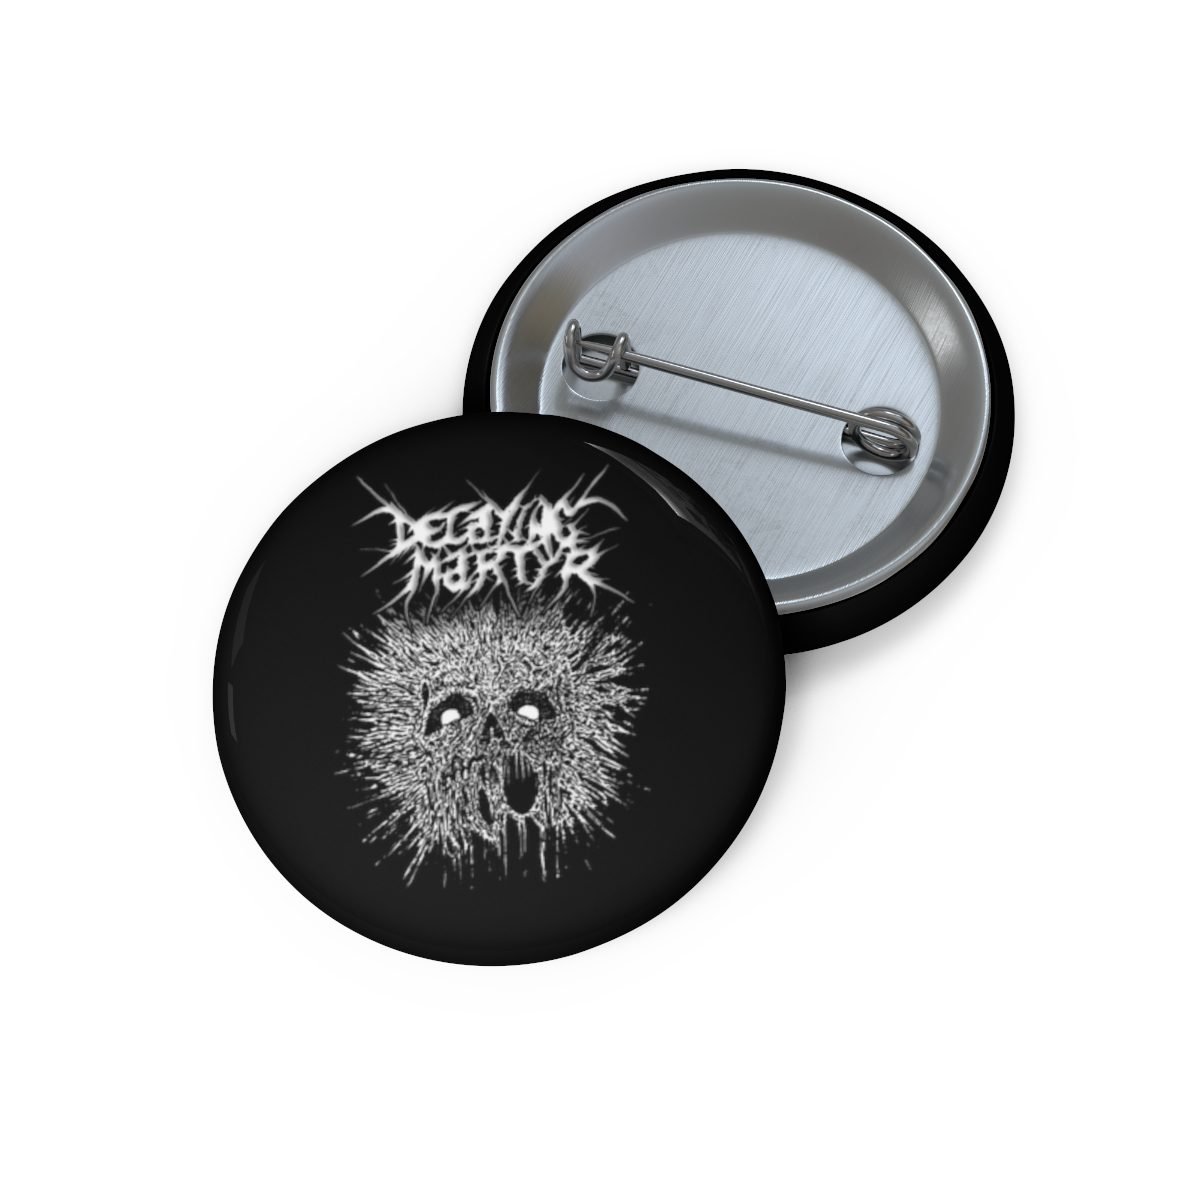 Decaying Martyr – Martyr’s Cry Pin Buttons